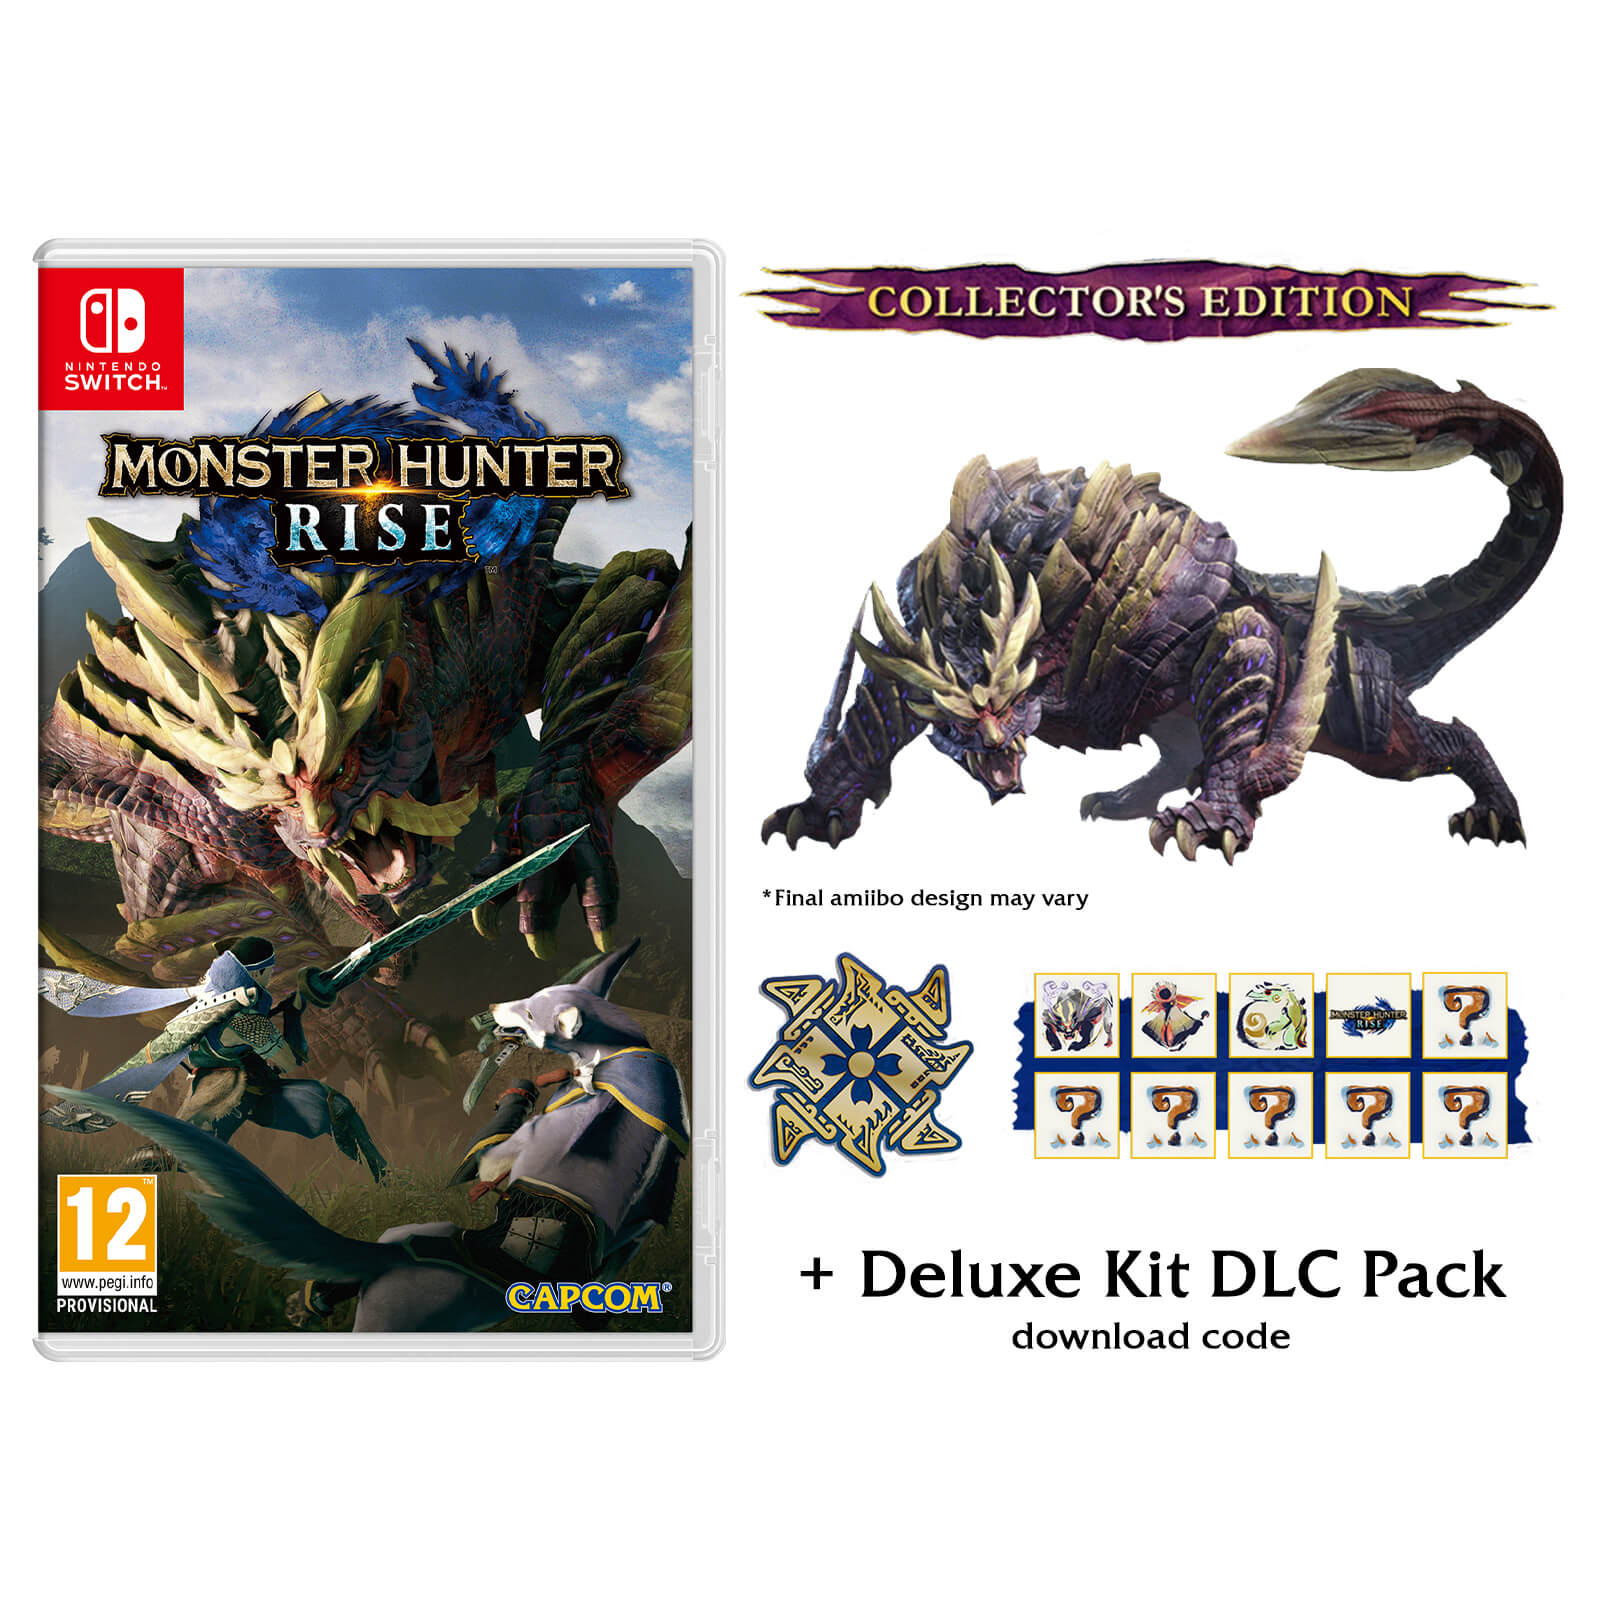 Monster Hunter Rise up for pre-order on Amazon UK and Nintendo UK store,  including collector\'s edition